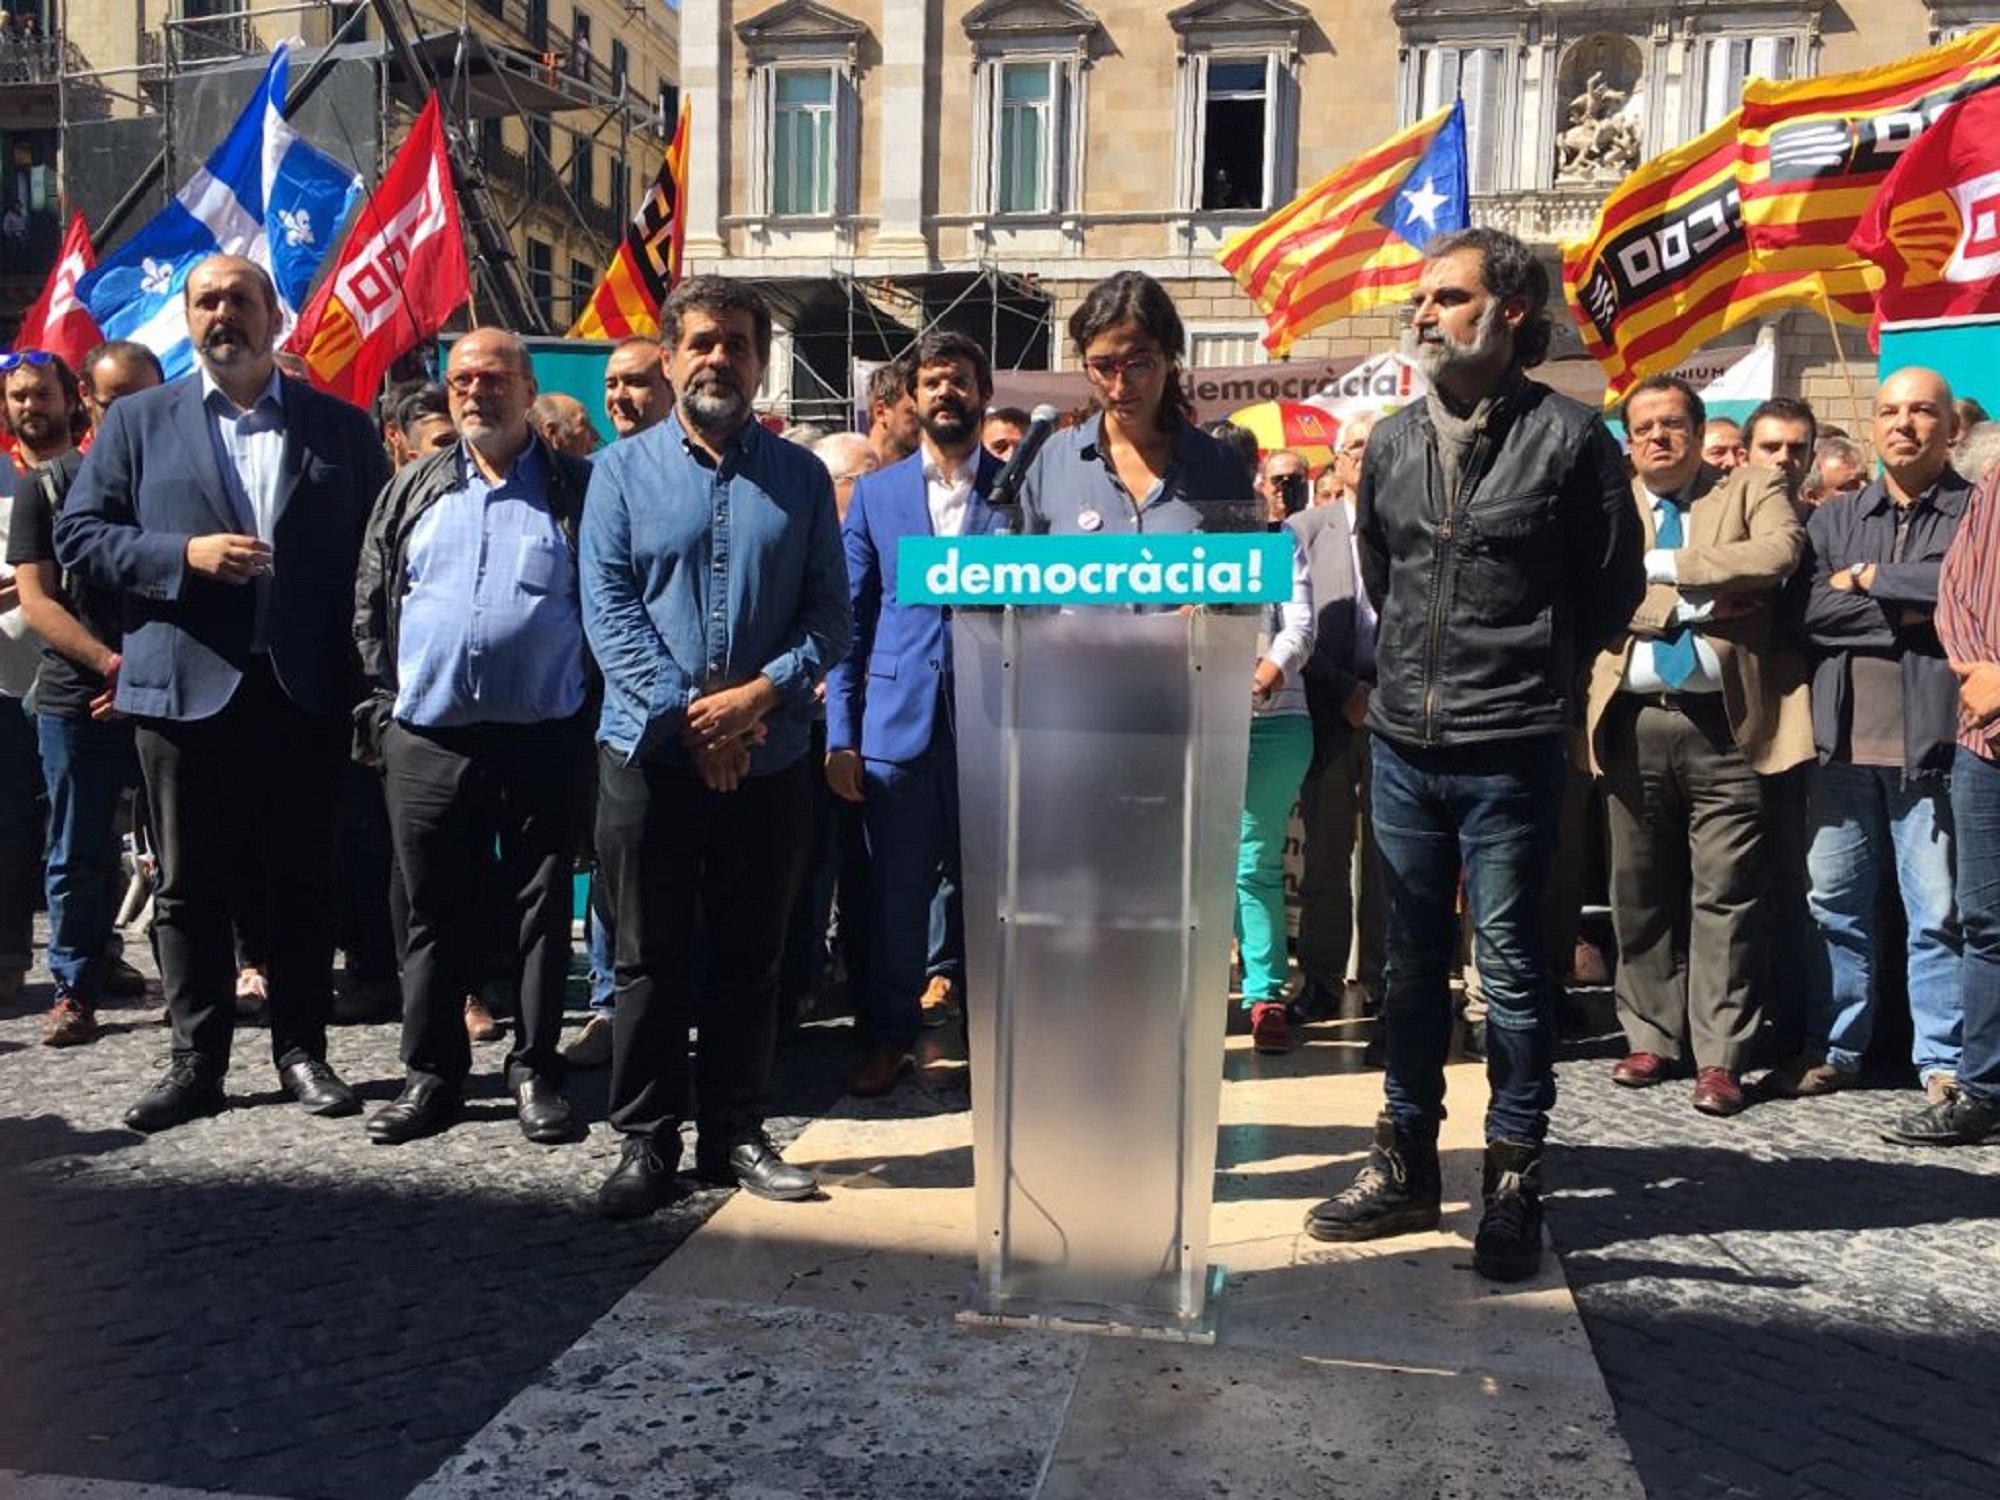 Pro-independence organisations call for rallies against Civil Guard's "coup d'état"